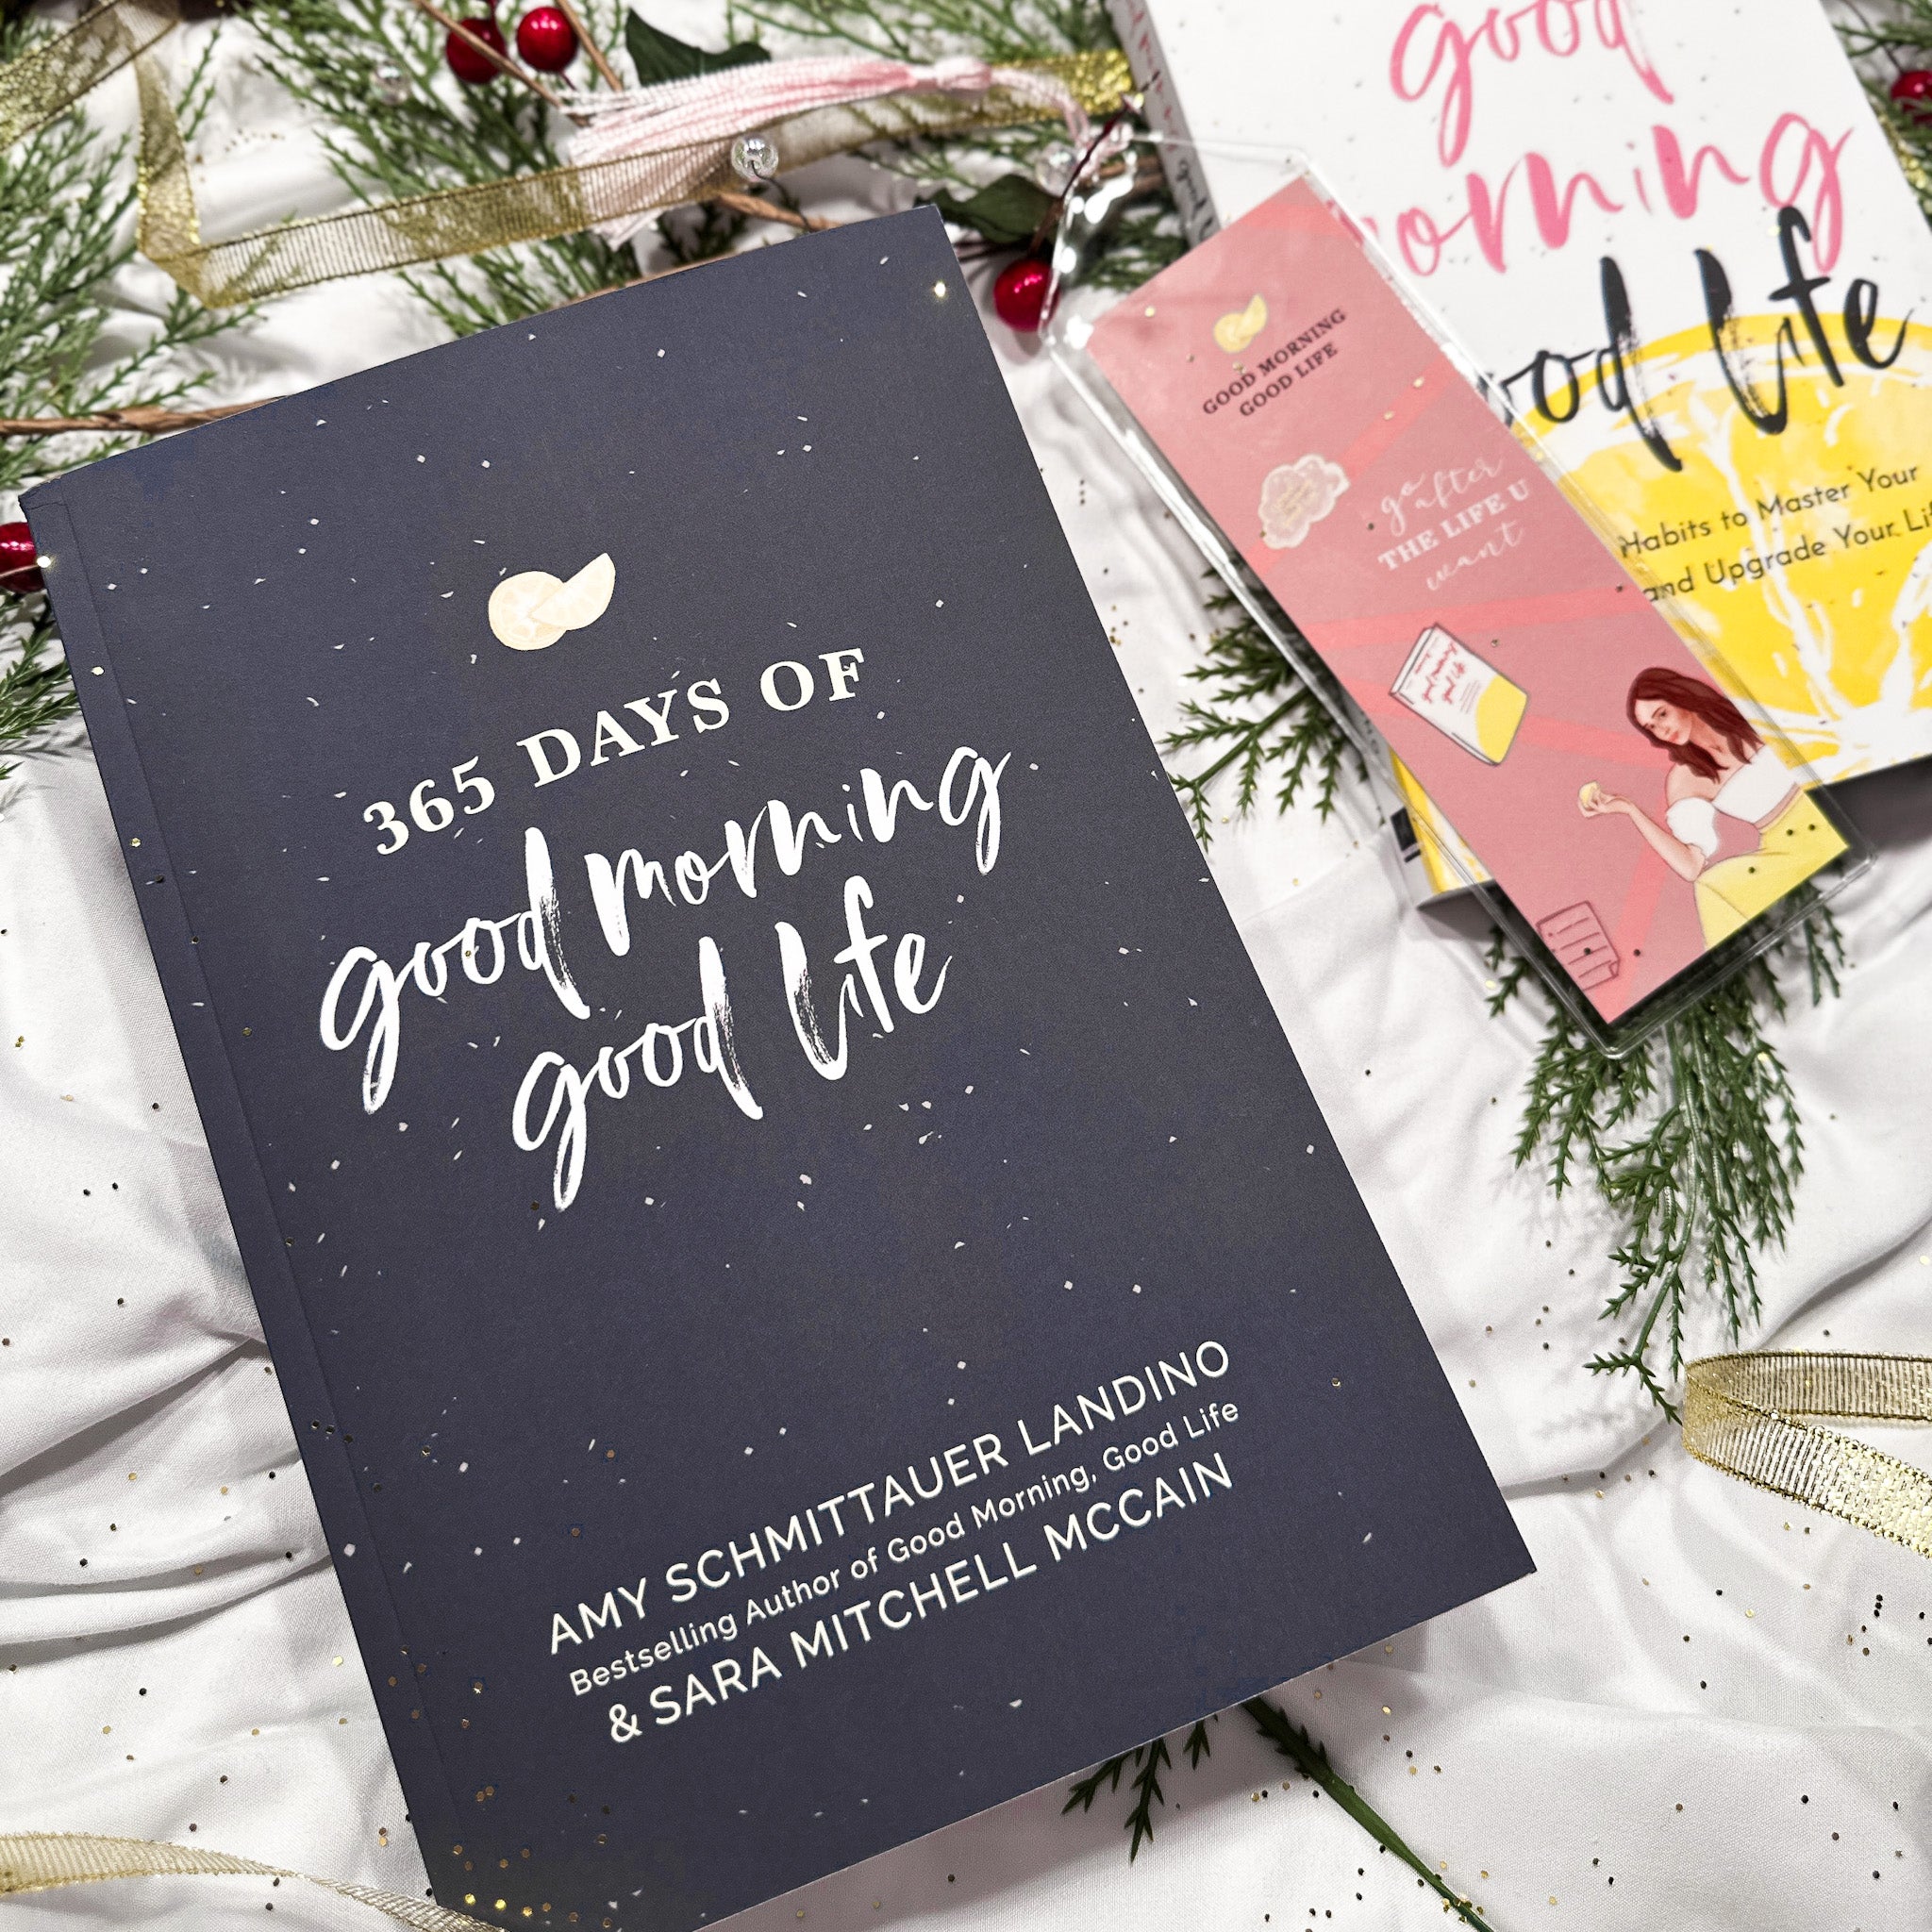 HOLIDAY BOOK BUNDLE! Author Signed Copies of Good Morning Good Life Book Series